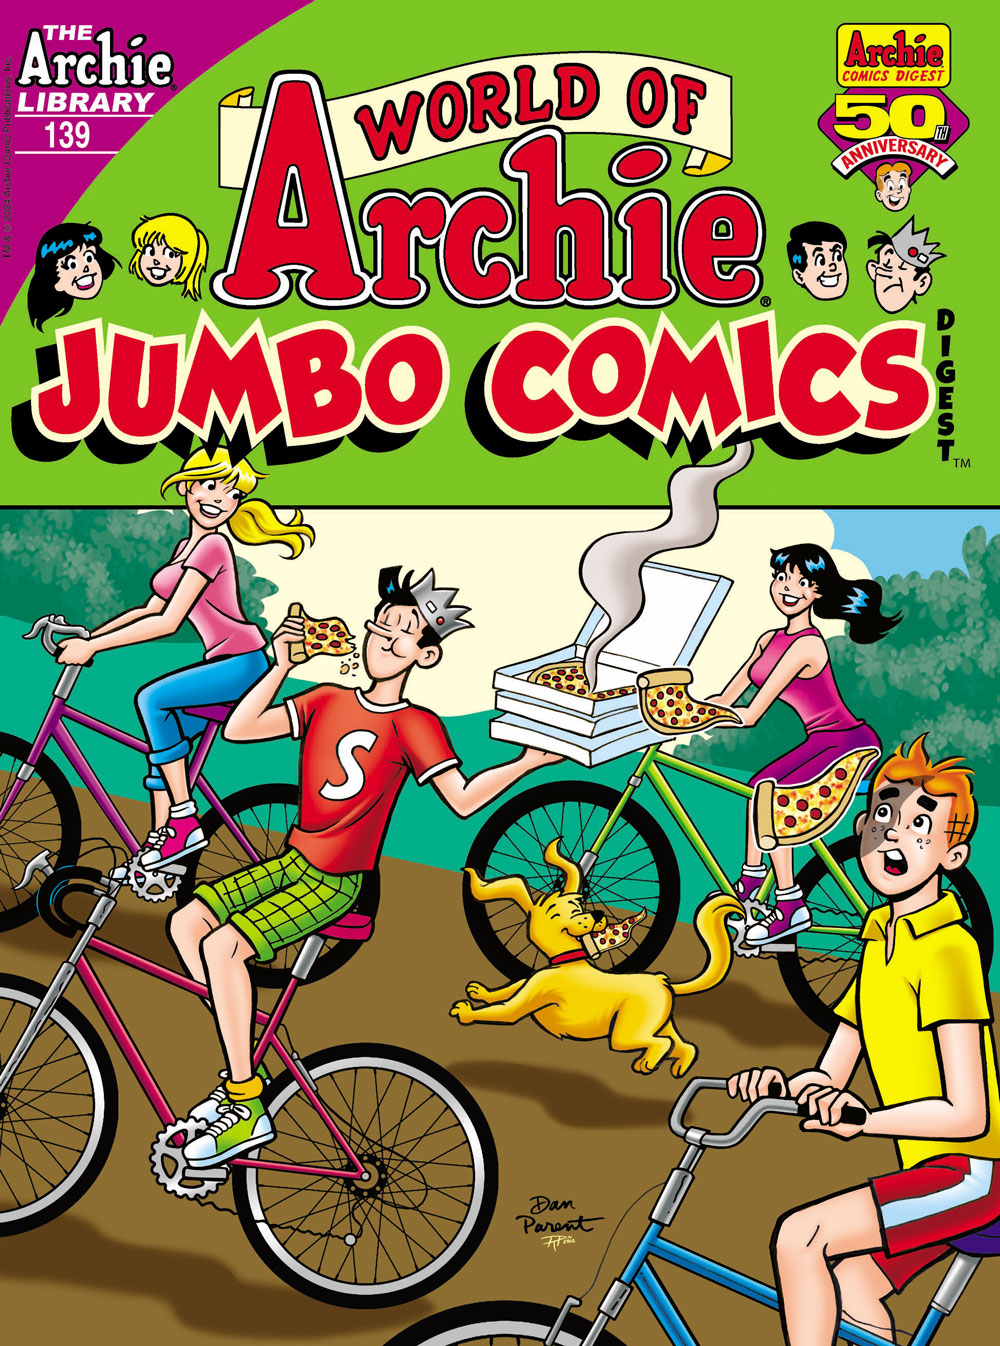 Archie and the ganag are riding mountain bikes on a trail, but Jughead is holidng a pile of pizza boxes and eating a slice. 